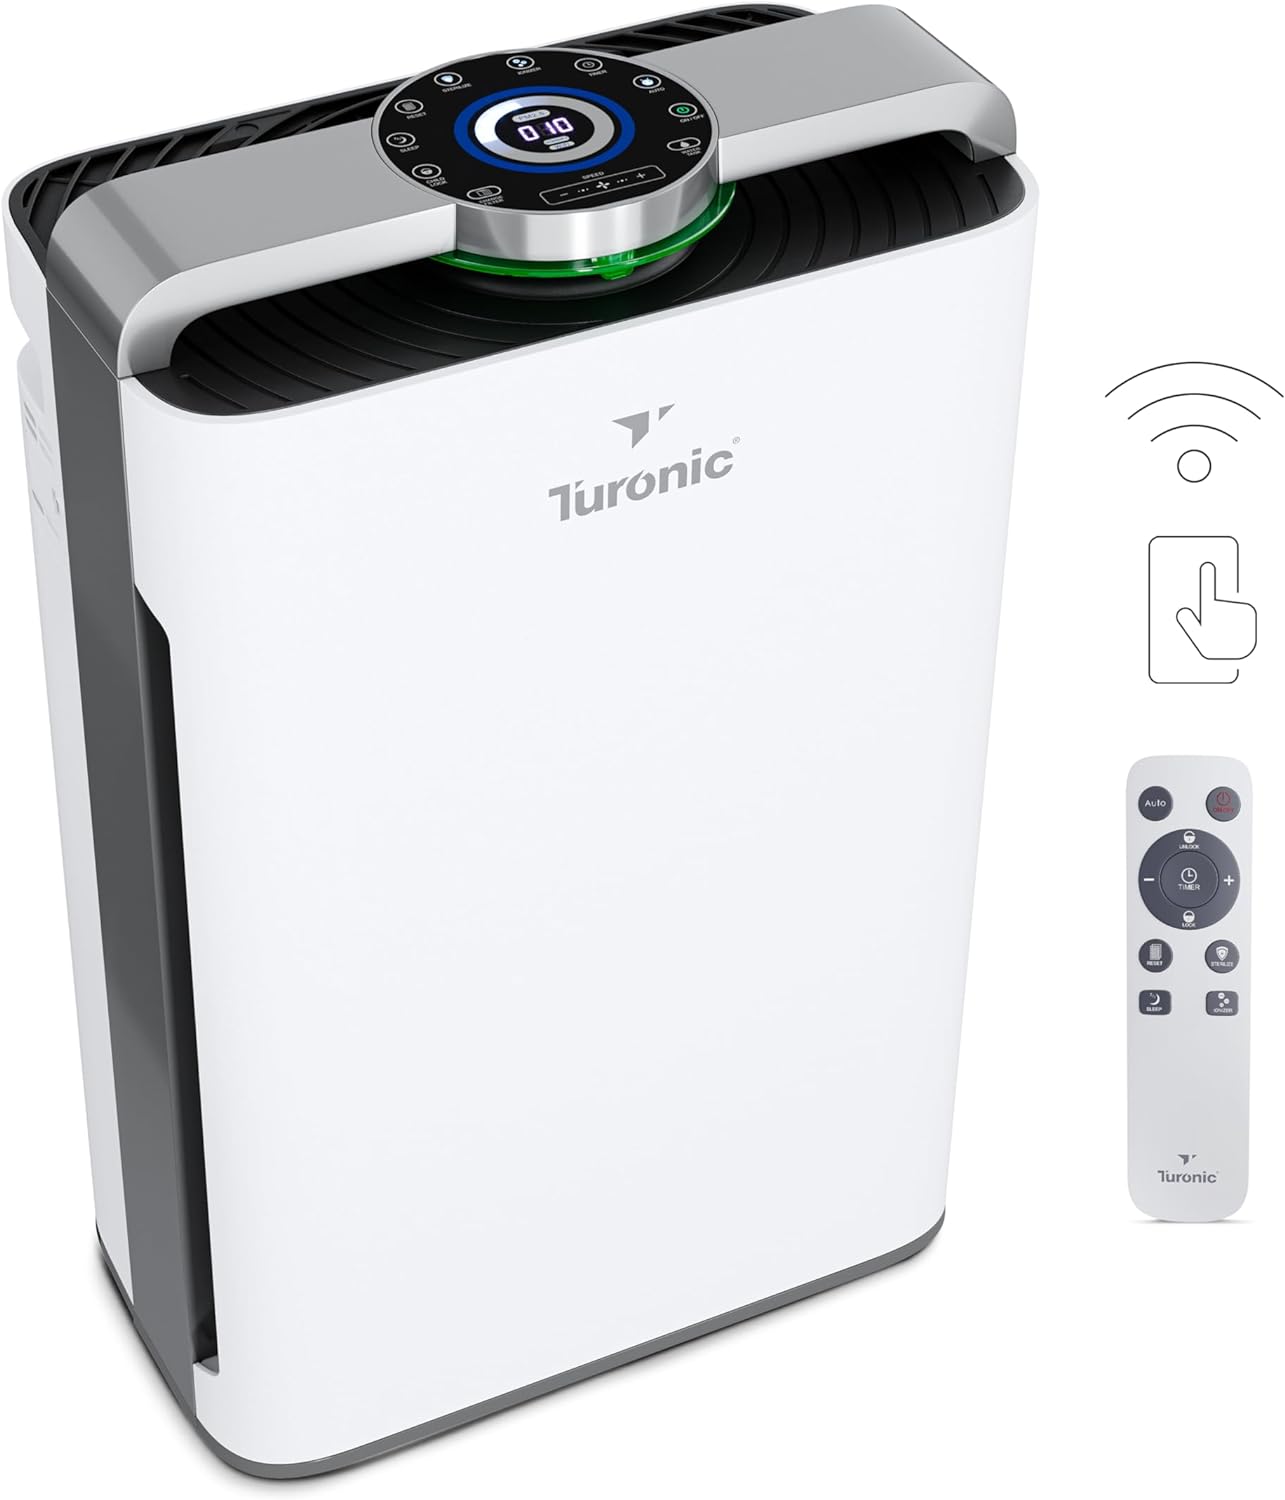 Turonic PH950 - Air Purifier And Humidifier Combo, Large Room Air Cleaner For Home - up to 4200 Sq Ft, 8-Stage Purification w/True Hepa 13 Filter, UV Light  Ionizer, Smart Auto Mode, Wi-Fi control